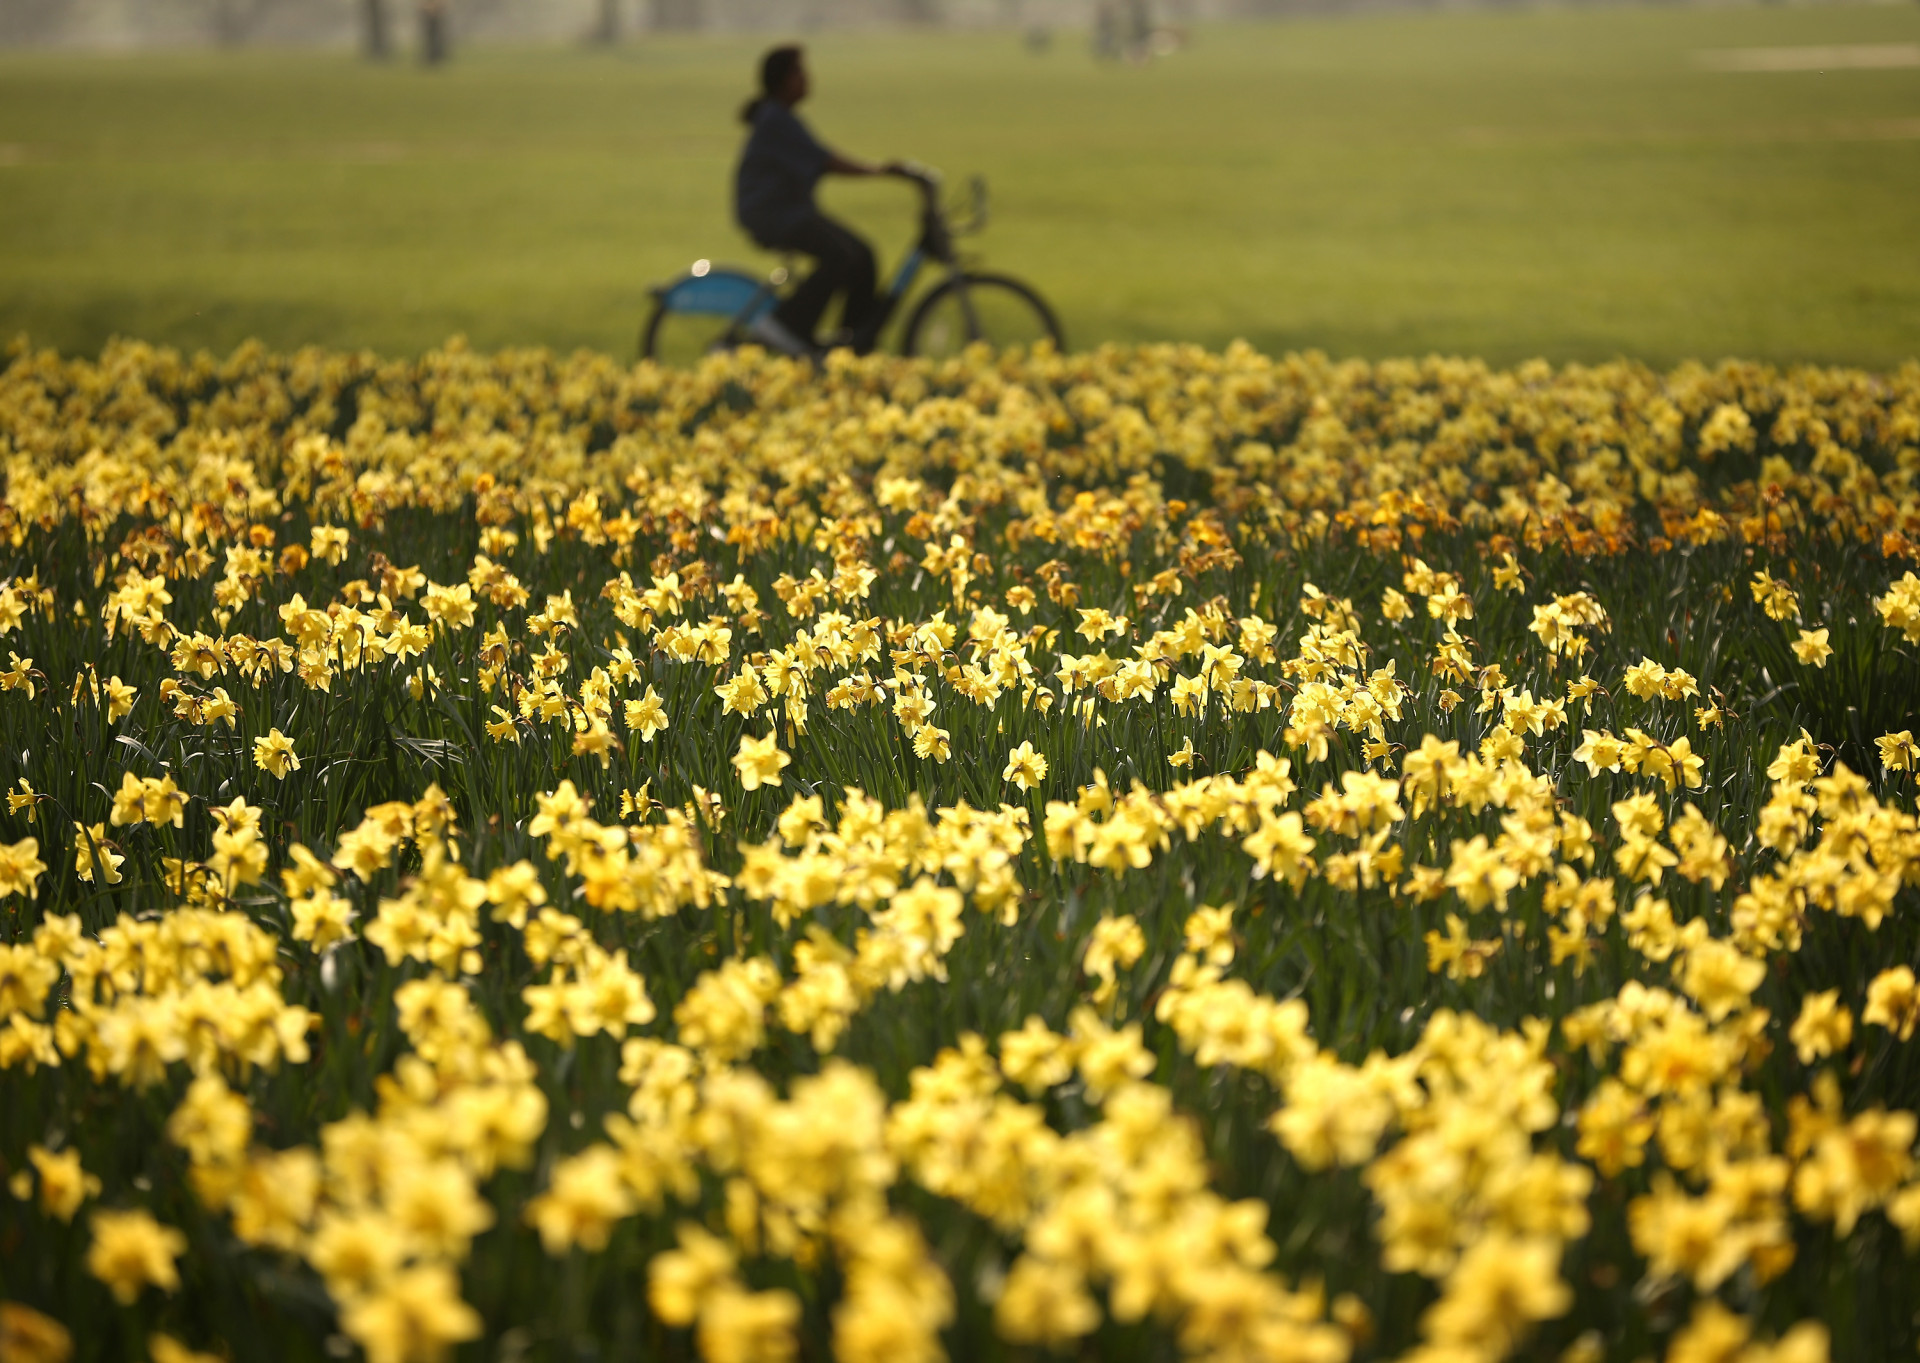 <p>There is nothing better than spotting the early signs of spring. In this gallery, take a look at the UK's top parks, gardens, and woodlands to see the blossom this spring.</p><p>You may also like:<a href="https://www.starsinsider.com/n/182220?utm_source=msn.com&utm_medium=display&utm_campaign=referral_description&utm_content=344596v2en-en"> The Empire State Building: beautiful pics and interesting facts</a></p>